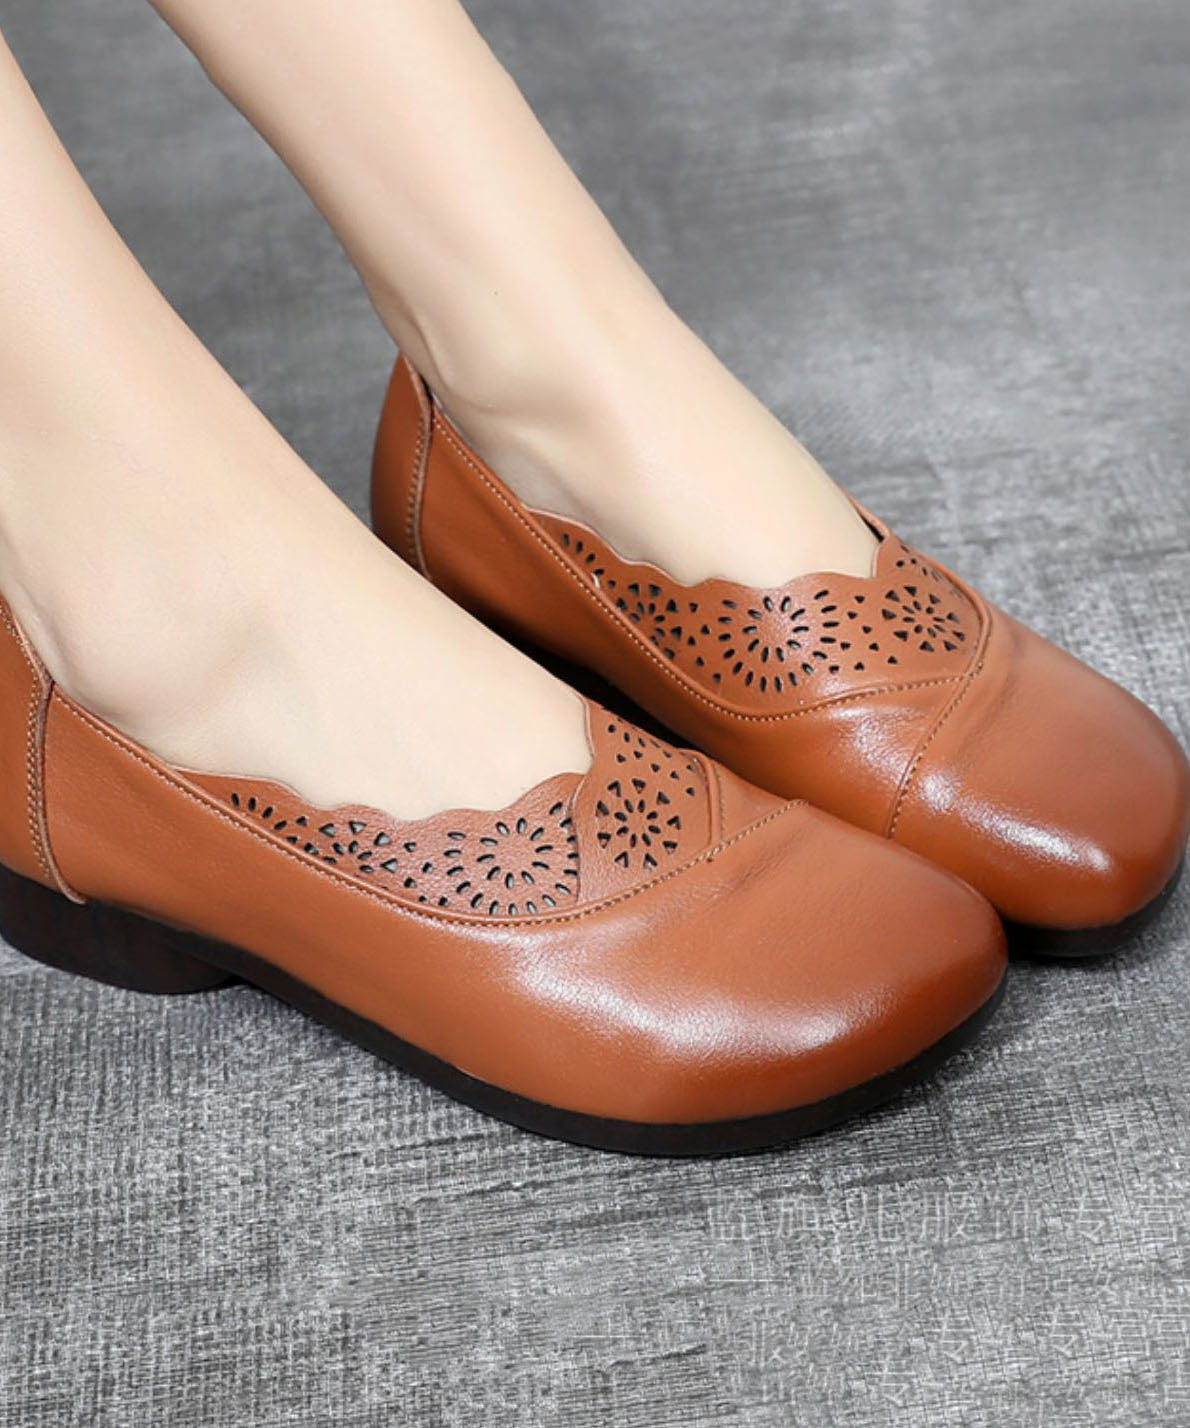 Green Hollow Out Flat Shoes Cowhide Leather Elegant Splicing Flats LC0507 - fabuloryshop